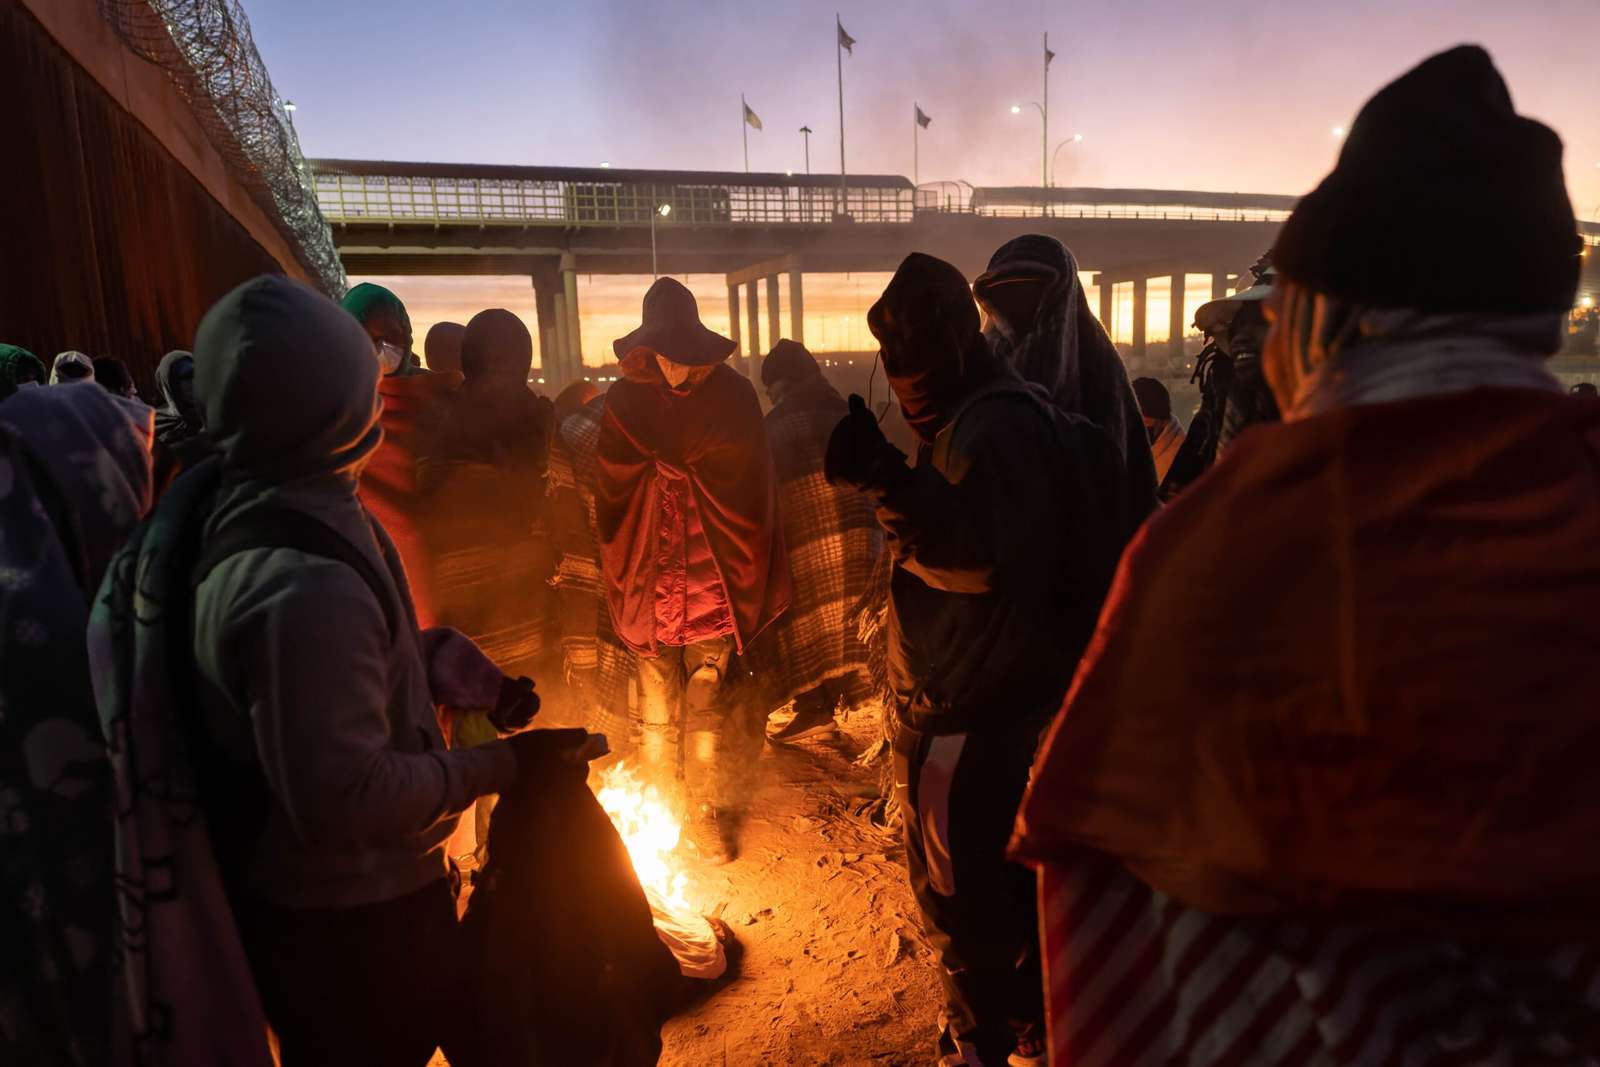 EL PASO, TEXAS - DECEMBER 22: Immigrants warm by a fire at dawn after spending a night alongside the U.S.-Mexico border fence on December 22, 2022 in El Paso, Texas. A spike in the number of migrants crossing over to seek asylum in the United States has challenged local, state and federal authorities. The numbers are expected to increase as the fate of the Title 42 authority to expel migrants remains in limbo pending a Supreme Court decision expected after Christmas.   John Moore/Getty Images/AFP (Photo by JOHN MOORE / GETTY IMAGES NORTH AMERICA / Getty Images via AFP)